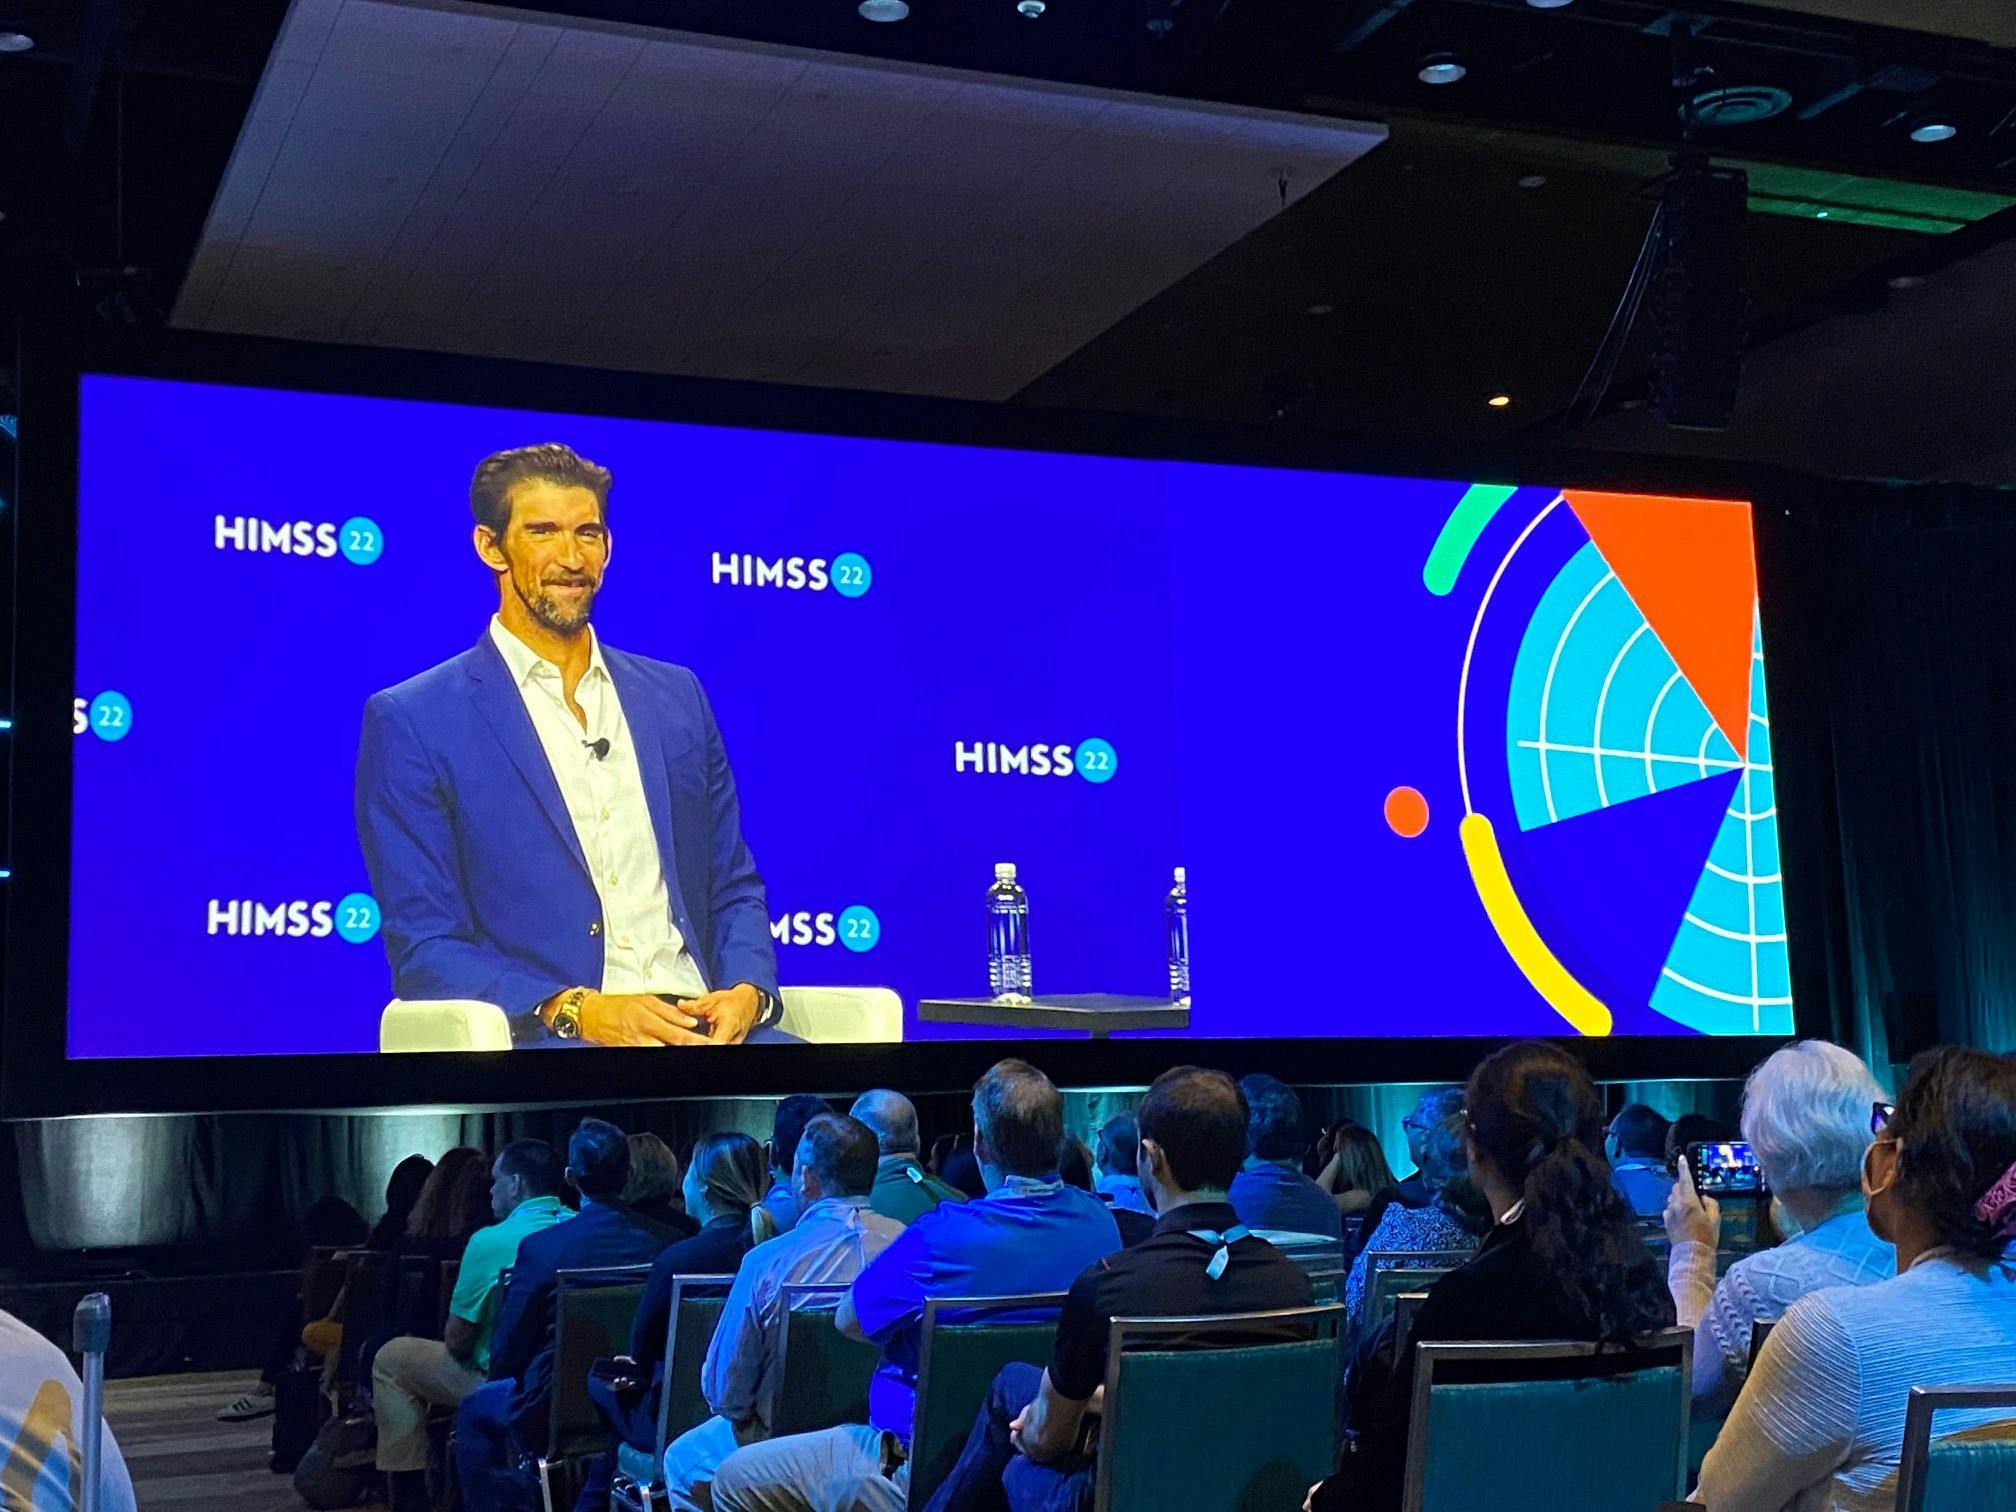 Michael Phelps, the most decorated Olympic athlete of all time, spoke during the closing session of the HIMSS Conference Friday. Phelps talked about his mental health struggles and advocacy efforts.